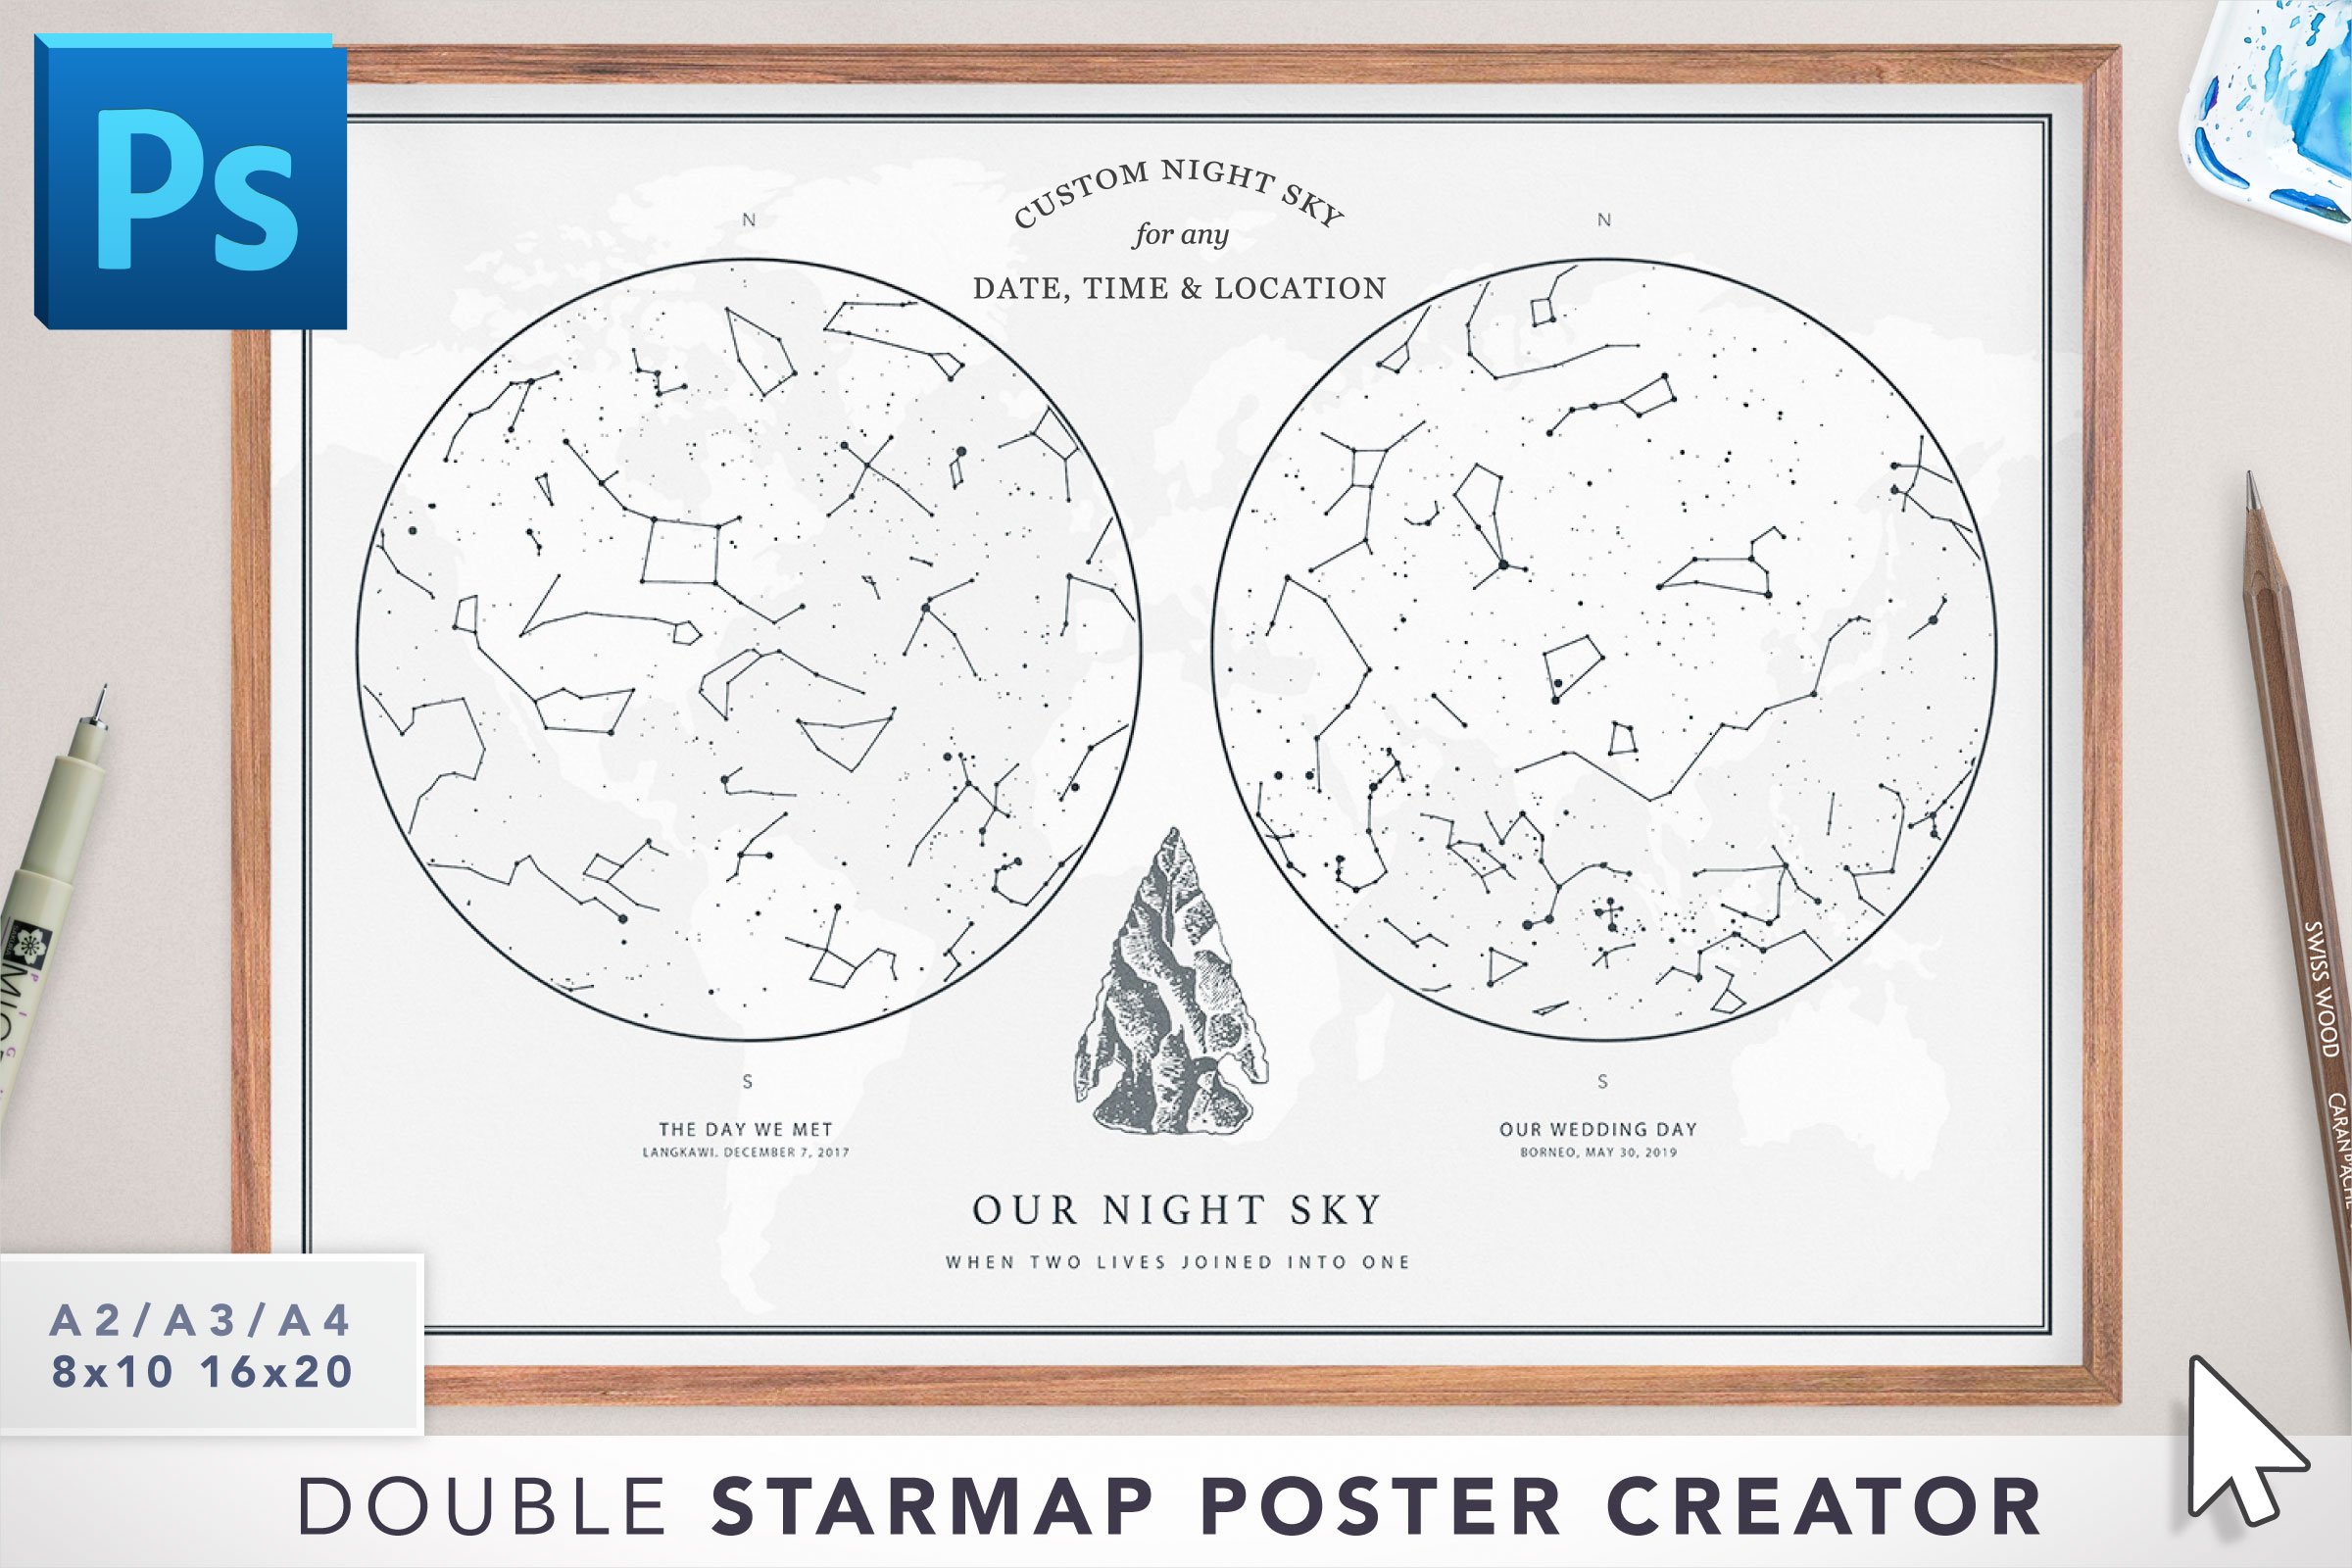 Starmap Poster Creator (Double Map)cover image.